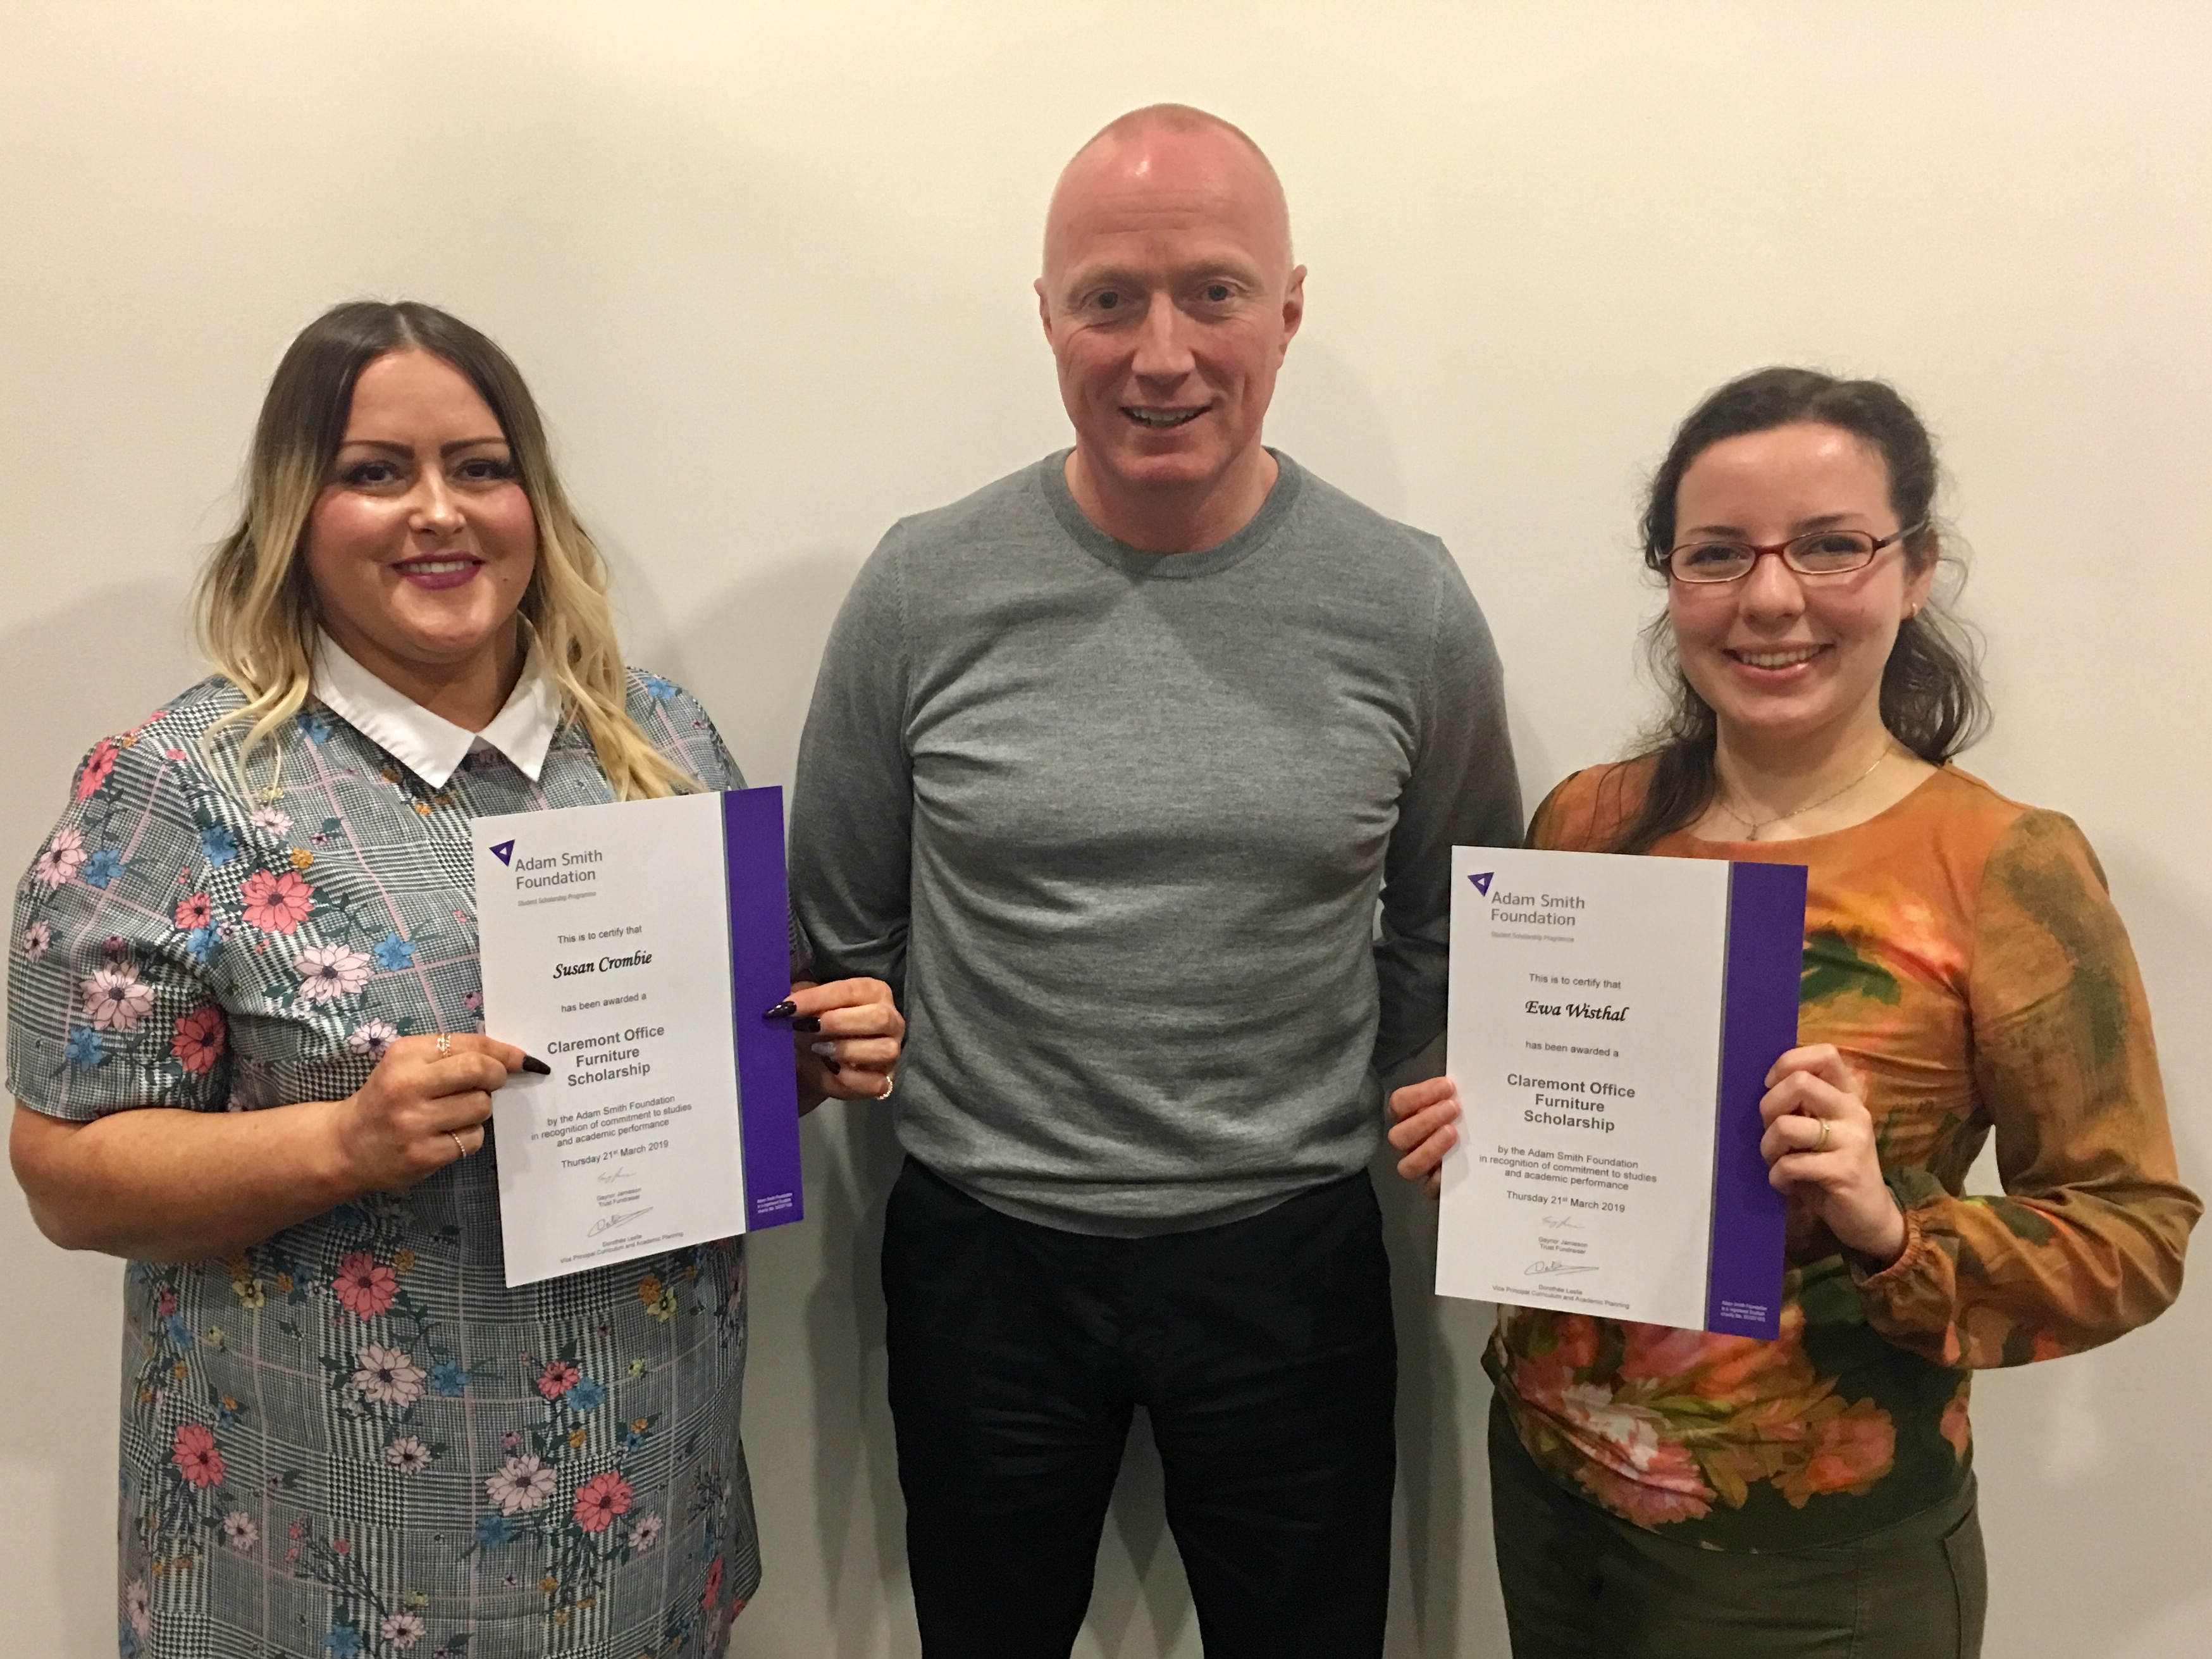 Susan Crombie (left) and Ewa Wisthal (right) are pictured receiving their scholarships from Martin Fellowes, Business Manager for Claremont Office Furniture.